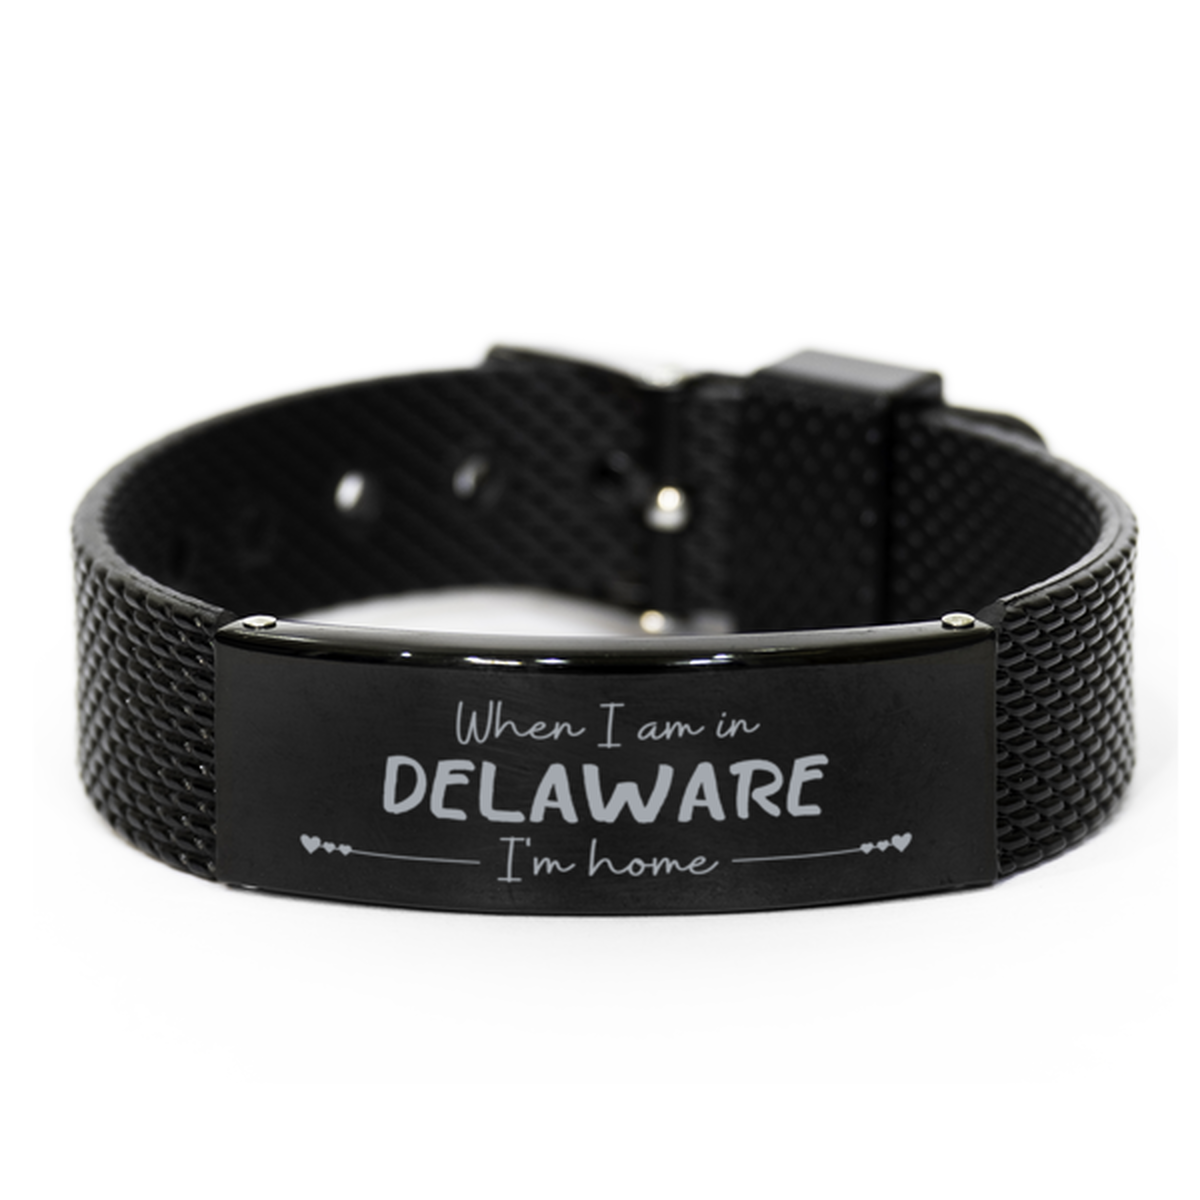 When I am in Delaware I'm home Black Shark Mesh Bracelet, Cheap Gifts For Delaware, State Delaware Birthday Gifts for Friends Coworker